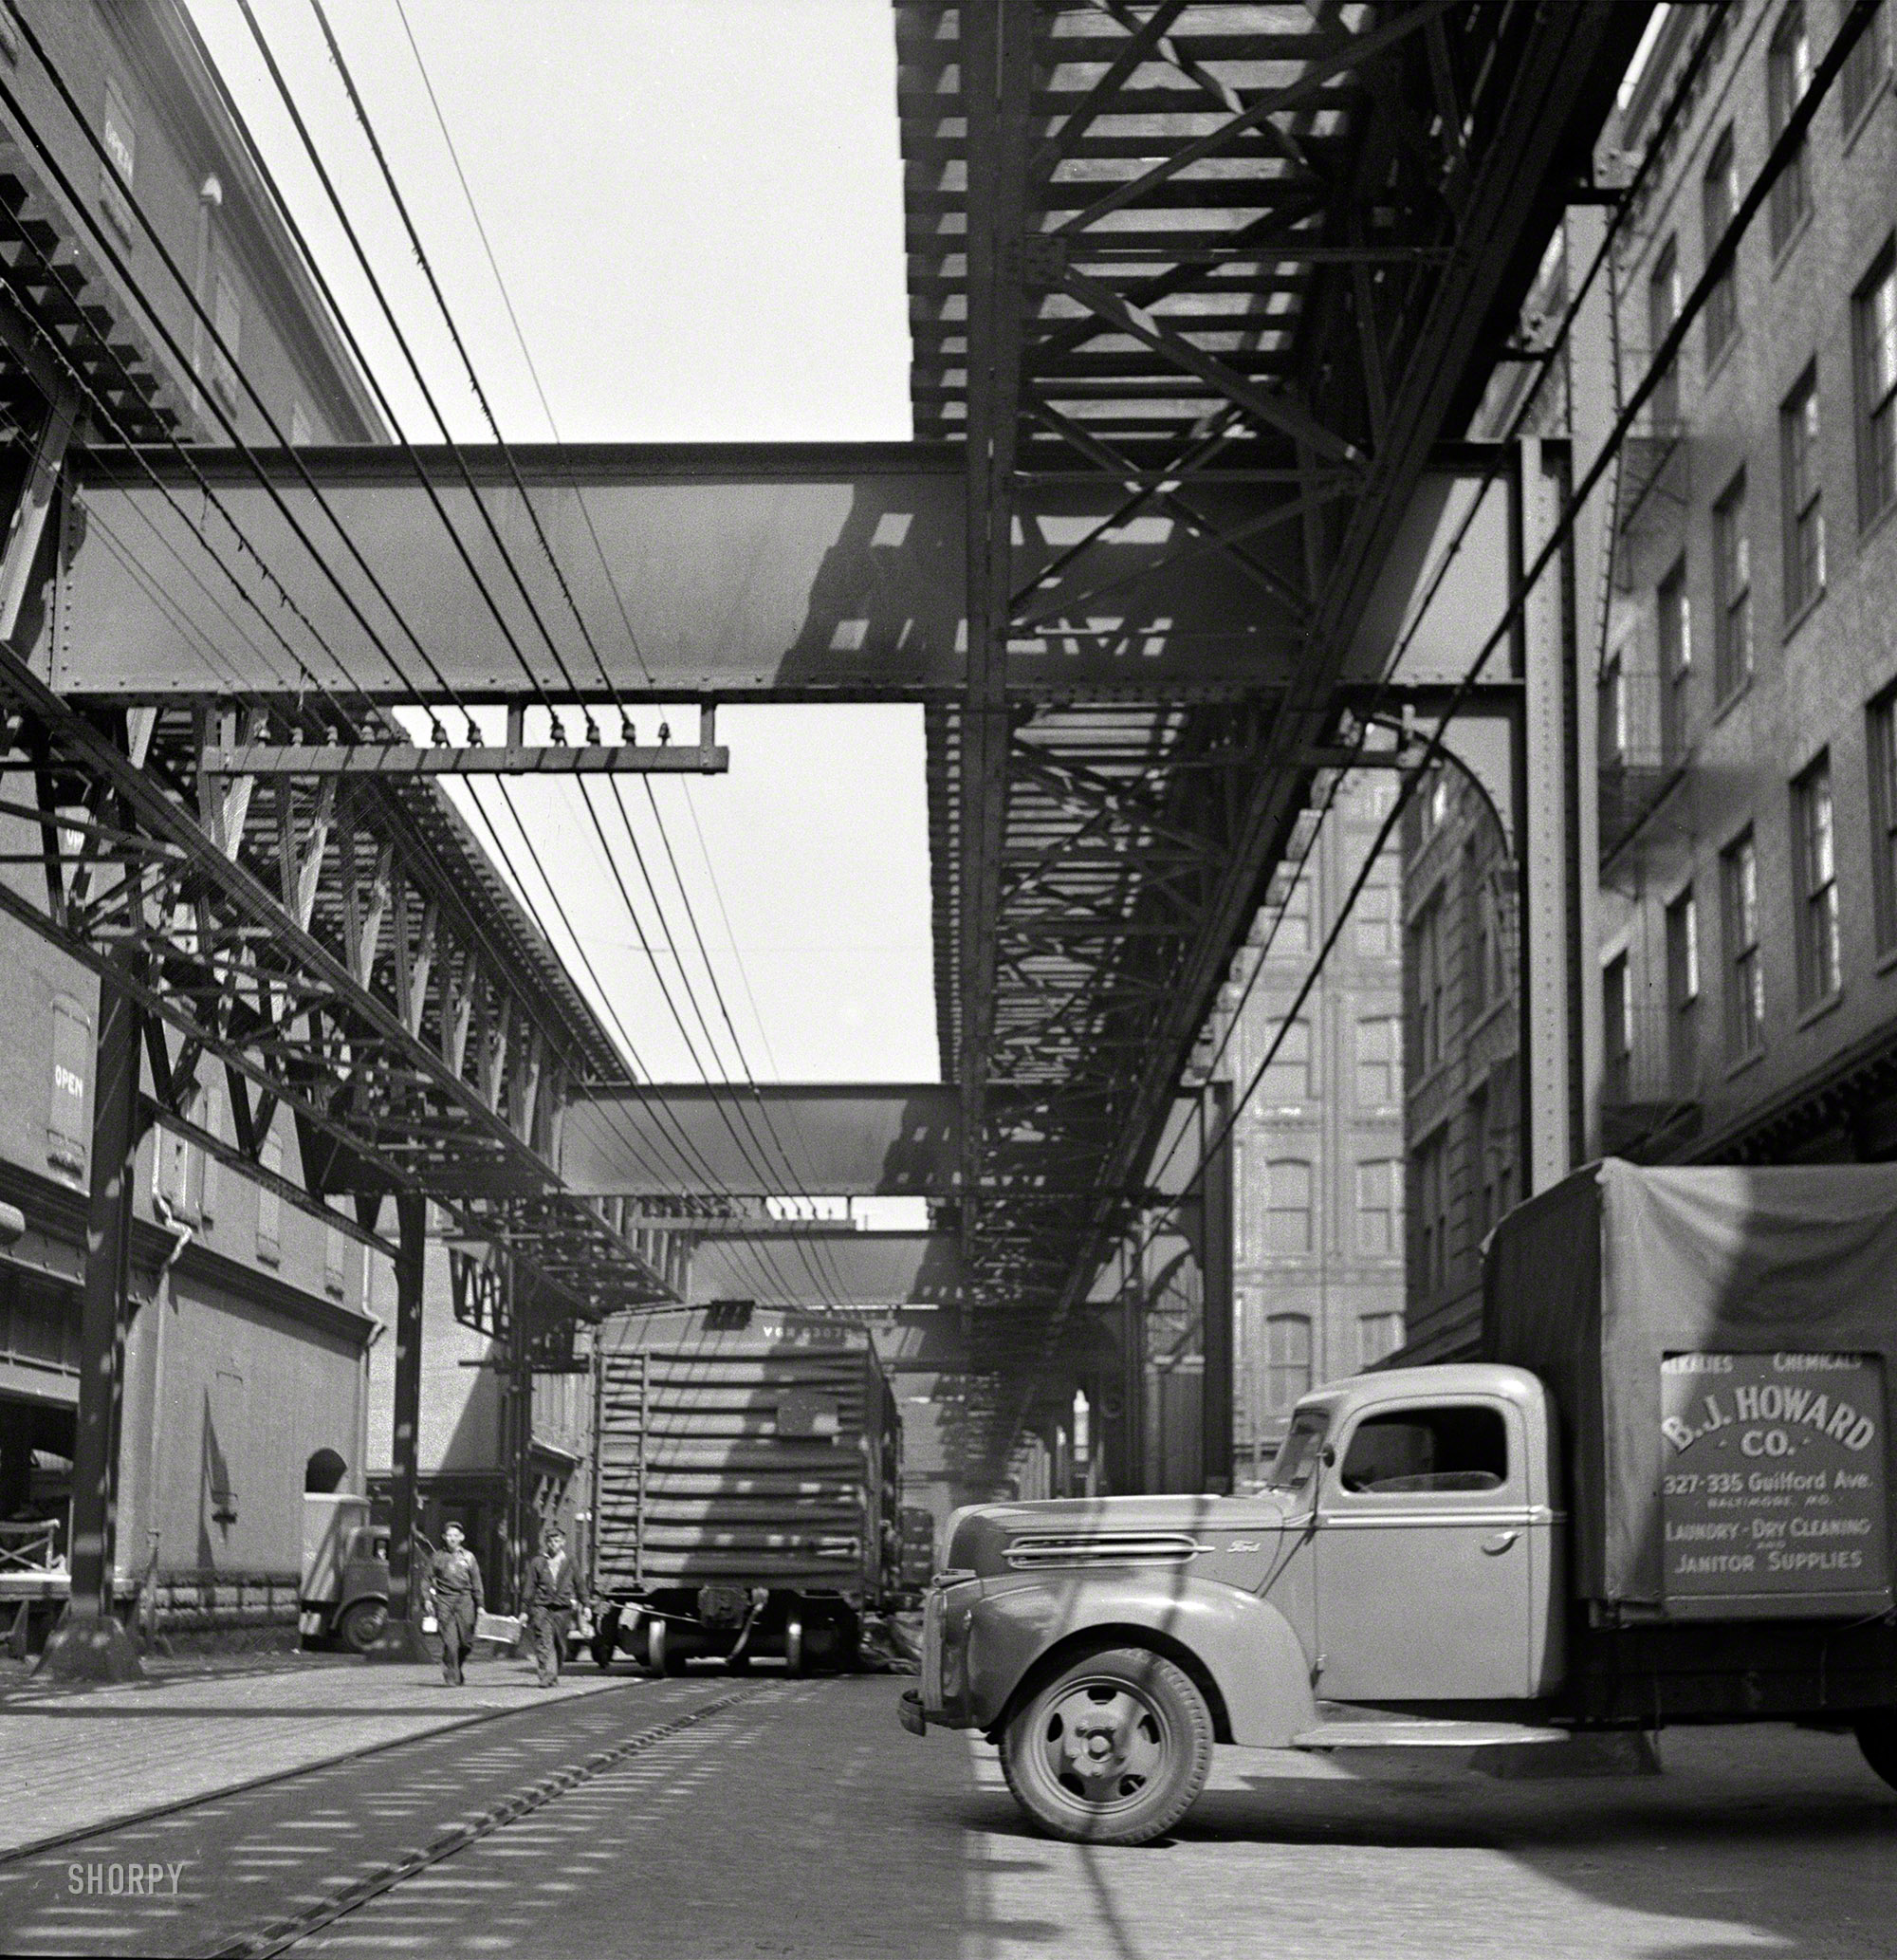 April 1943. Baltimore, Maryland. "Trucks and trains unloading goods underneath elevated trolley." Medium format negative by Marjory Collins. View full size.